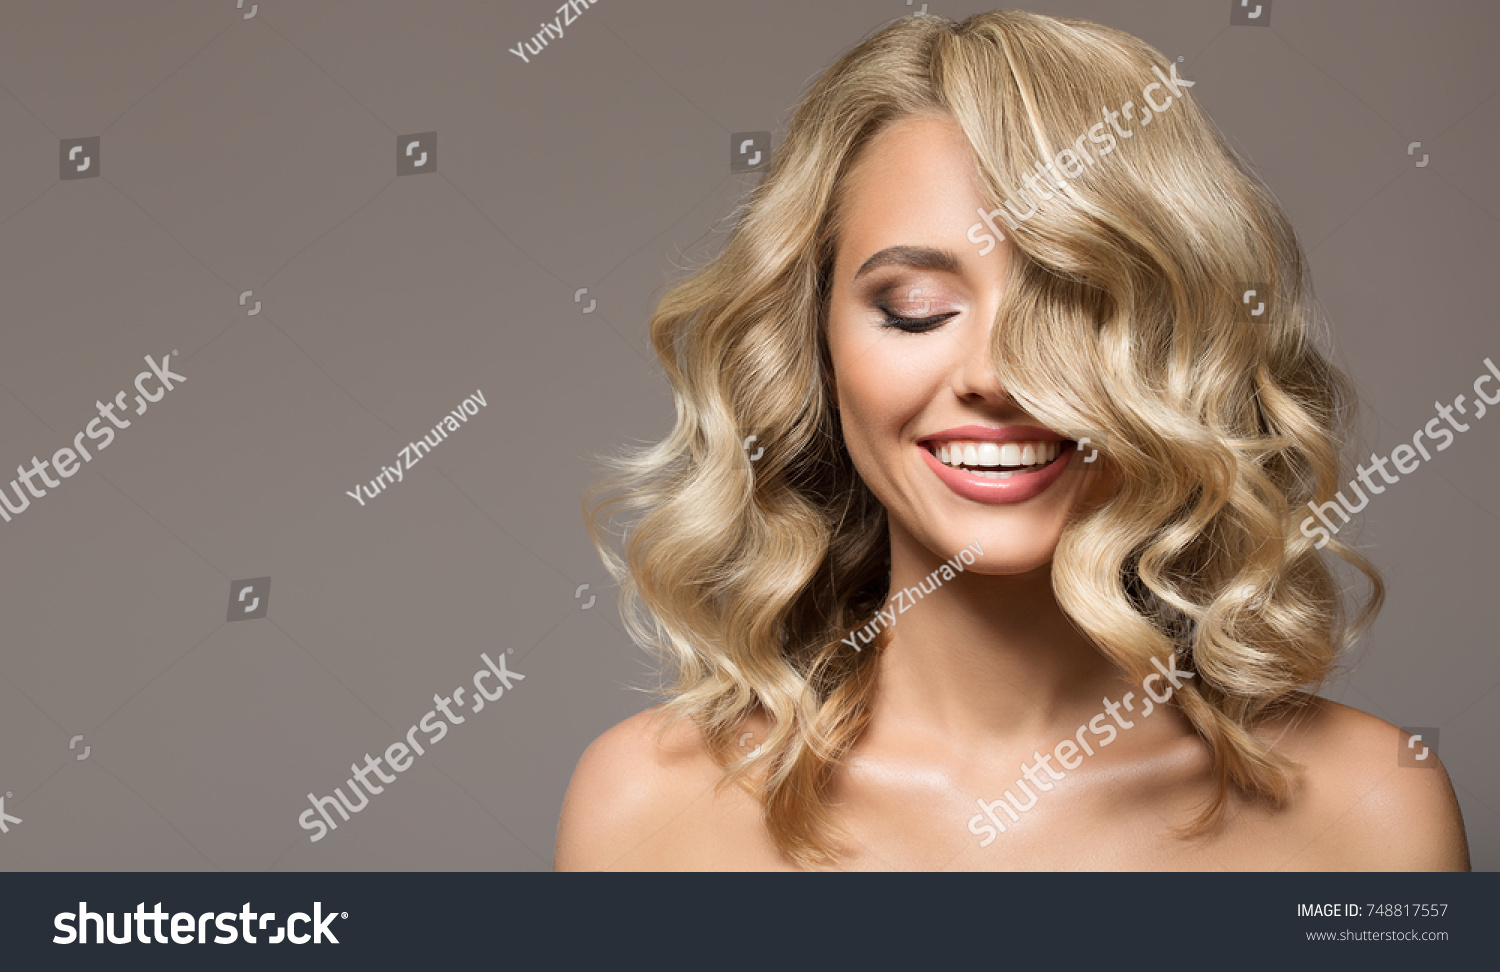 Blonde woman with curly beautiful hair smiling on gray background. 